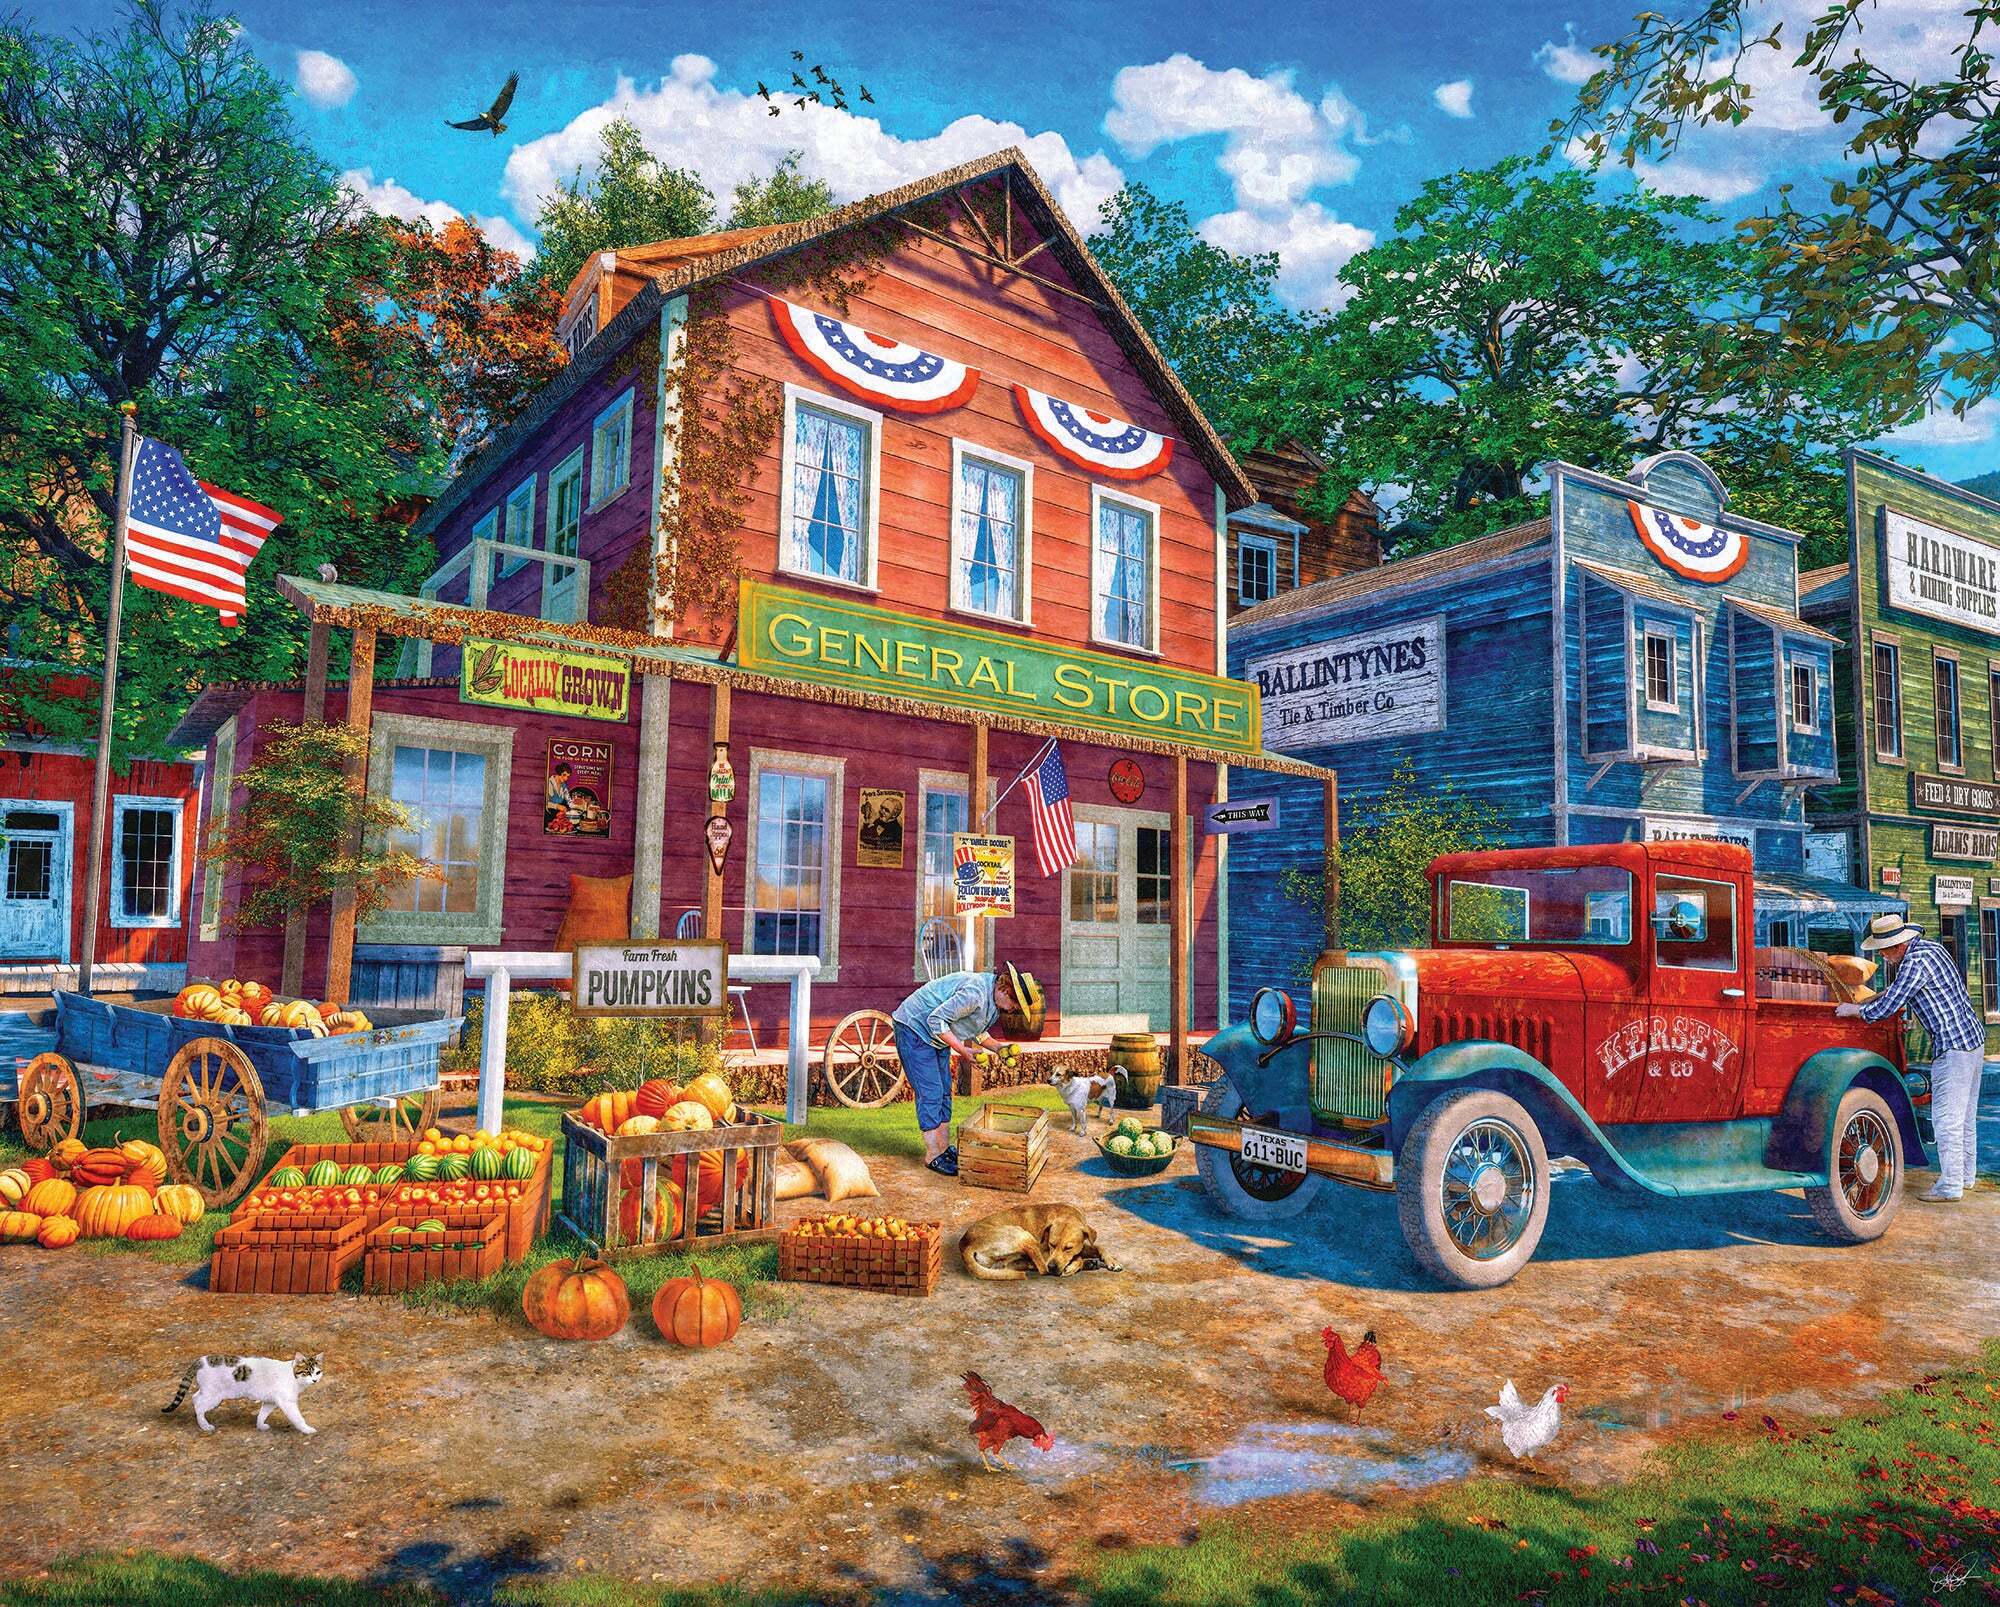 Country Store (1595pz) - 1000 Piece Jigsaw Puzzle